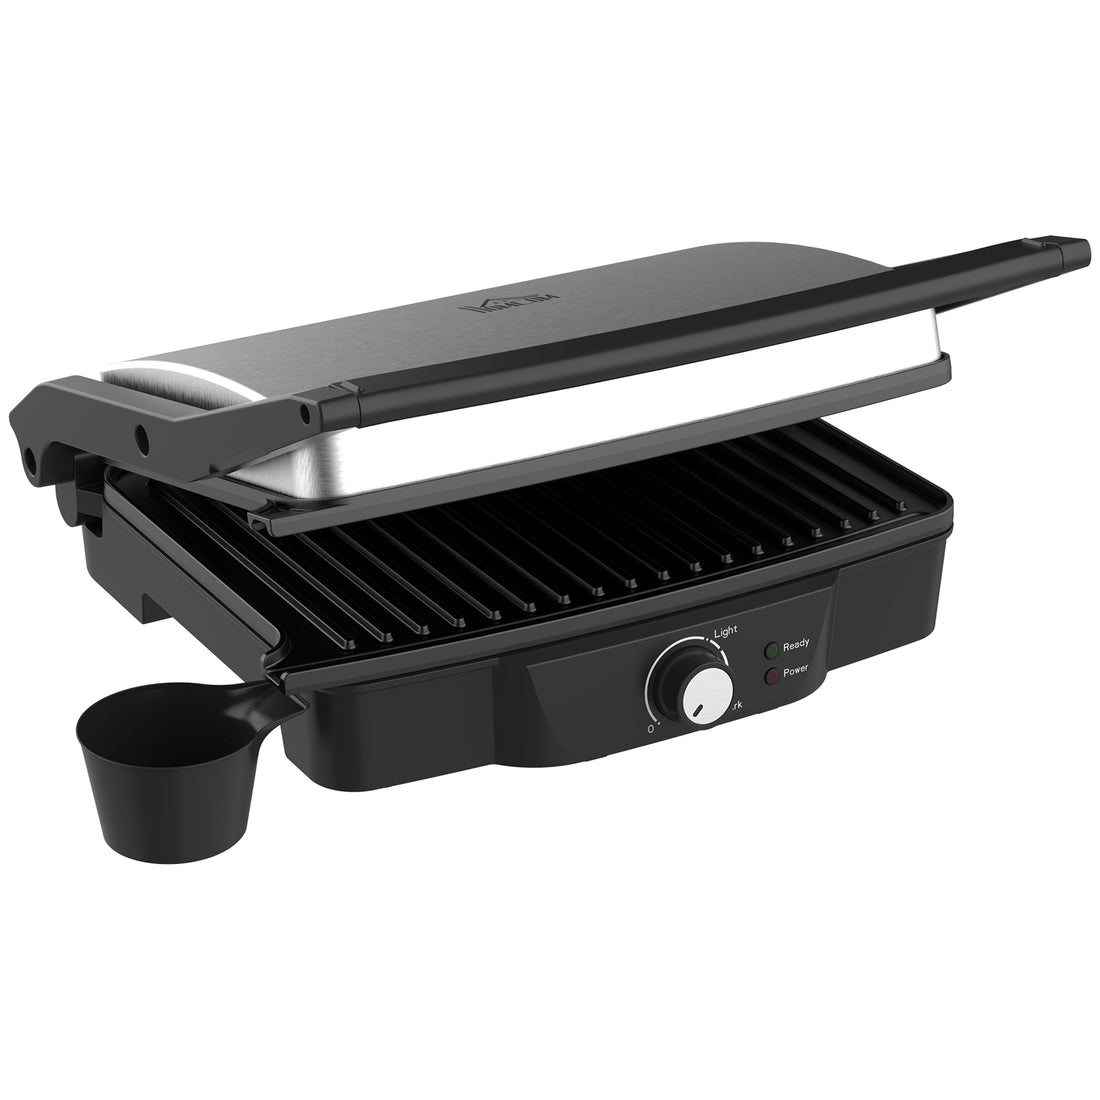 4 Slice Panini Press Grill, Stainless Steel